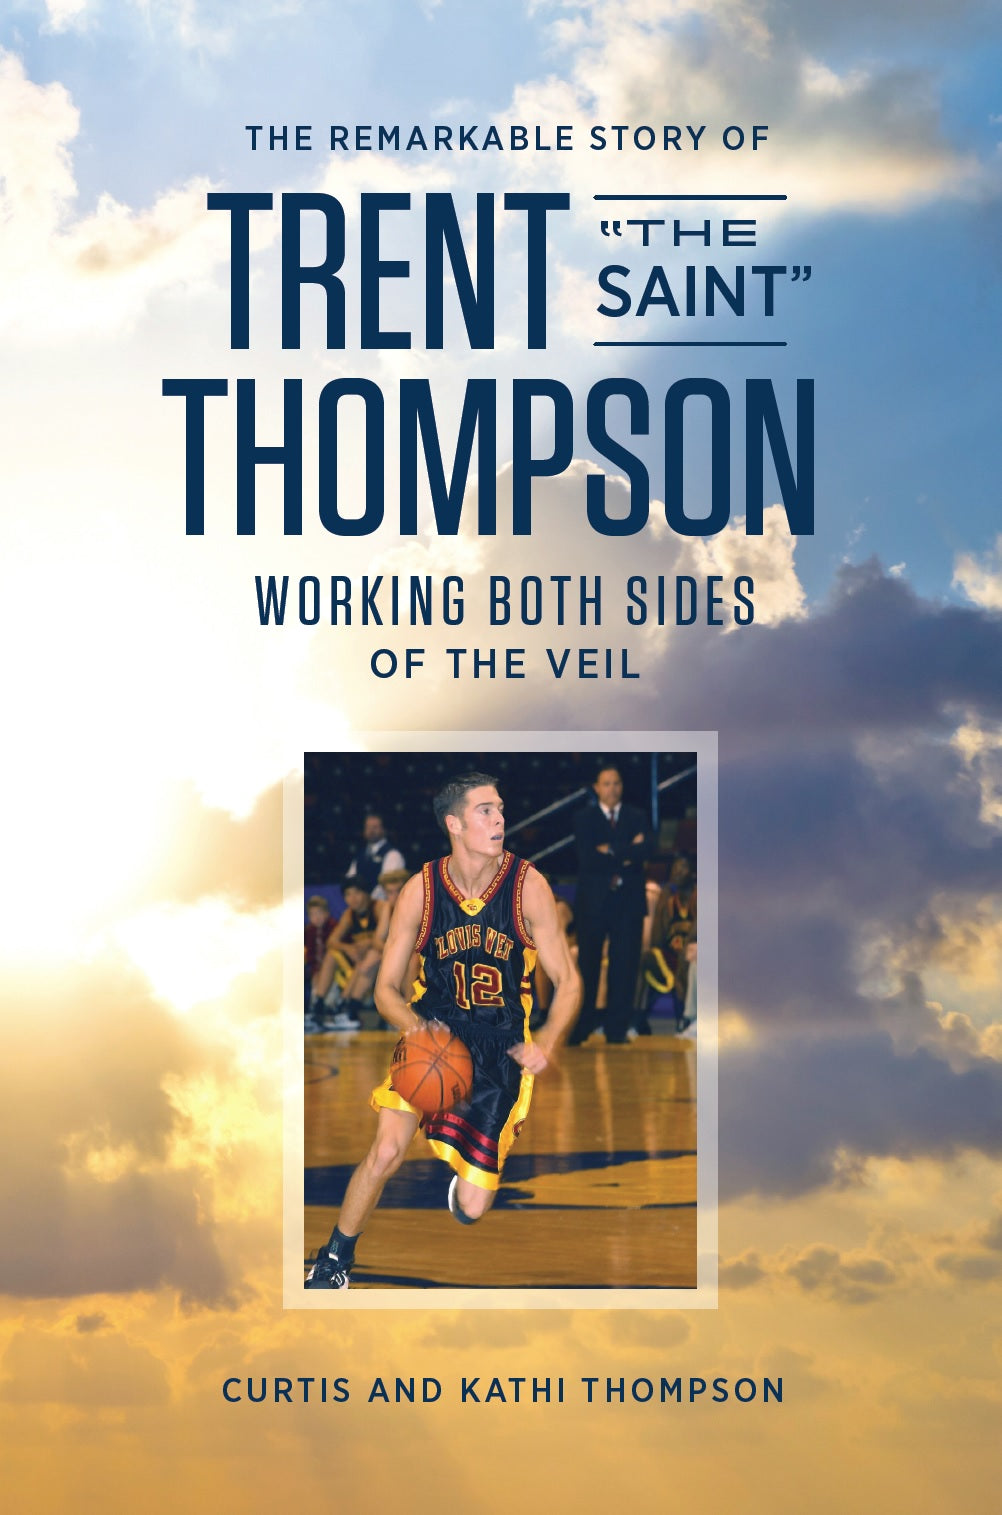 Working Both Sides of the Veil: The Remarkable Story of Trent "The Saint" Thompson